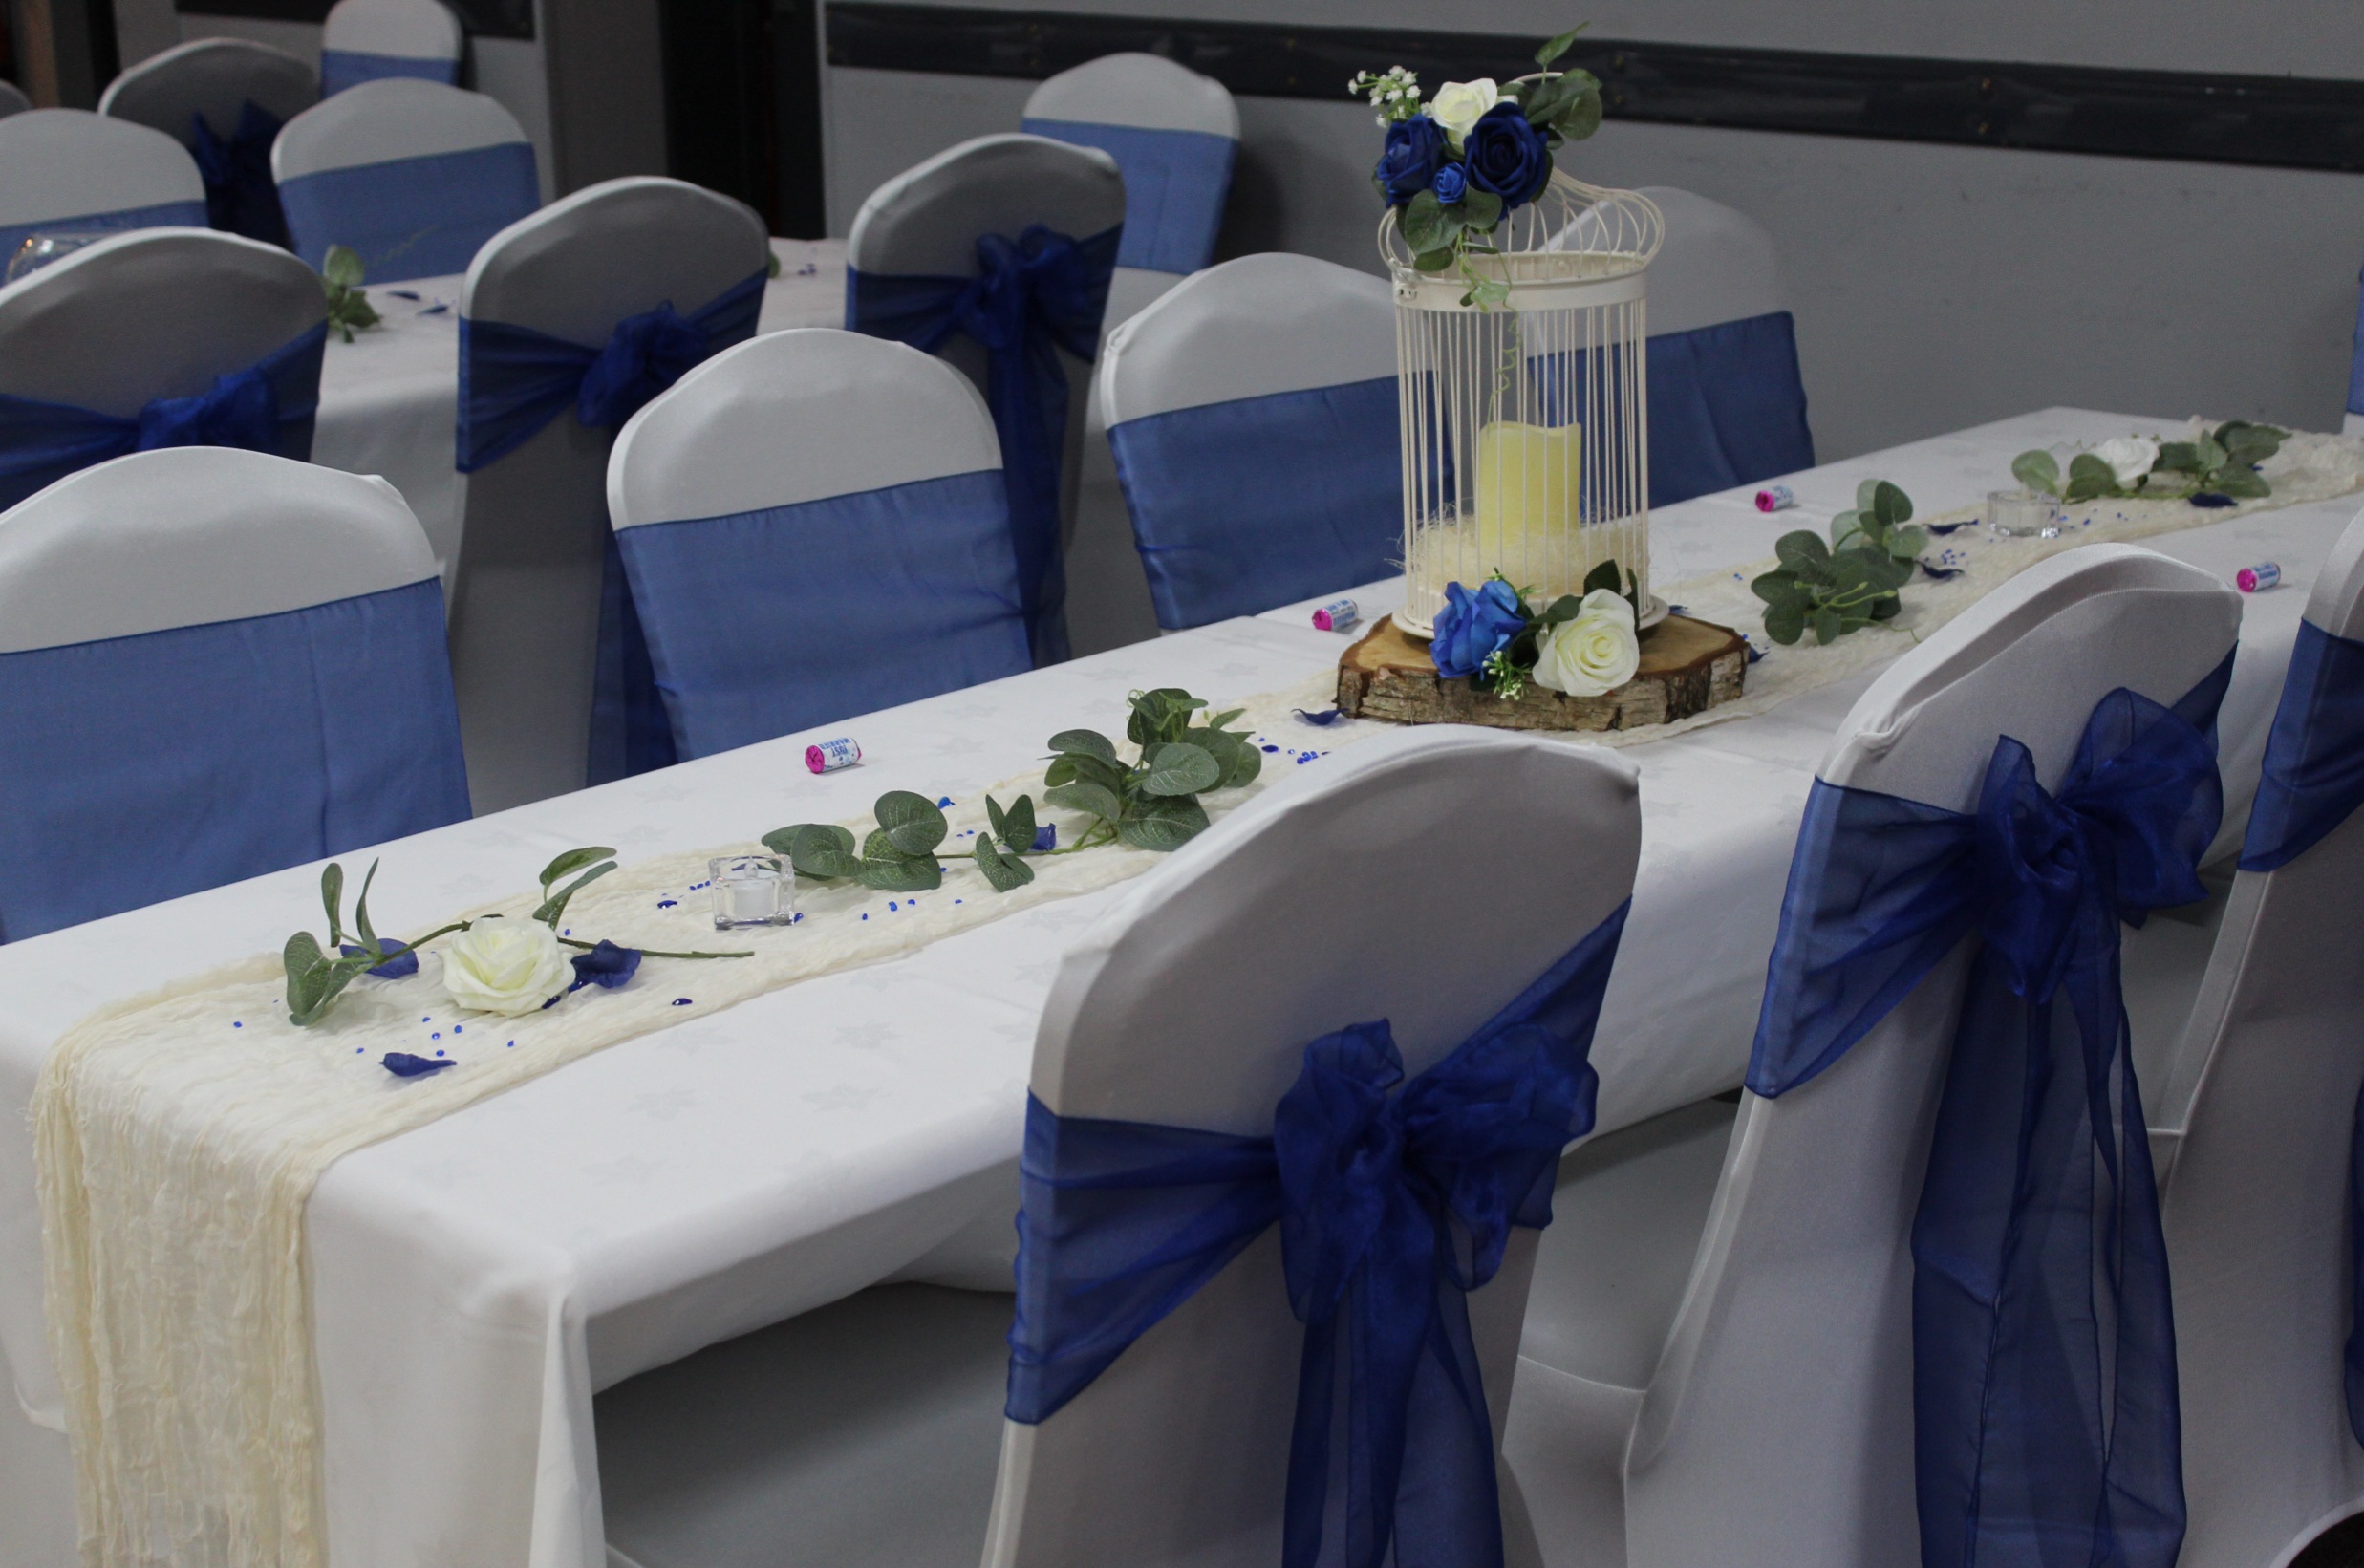 Wedding tables and chairs in white with blue sashes